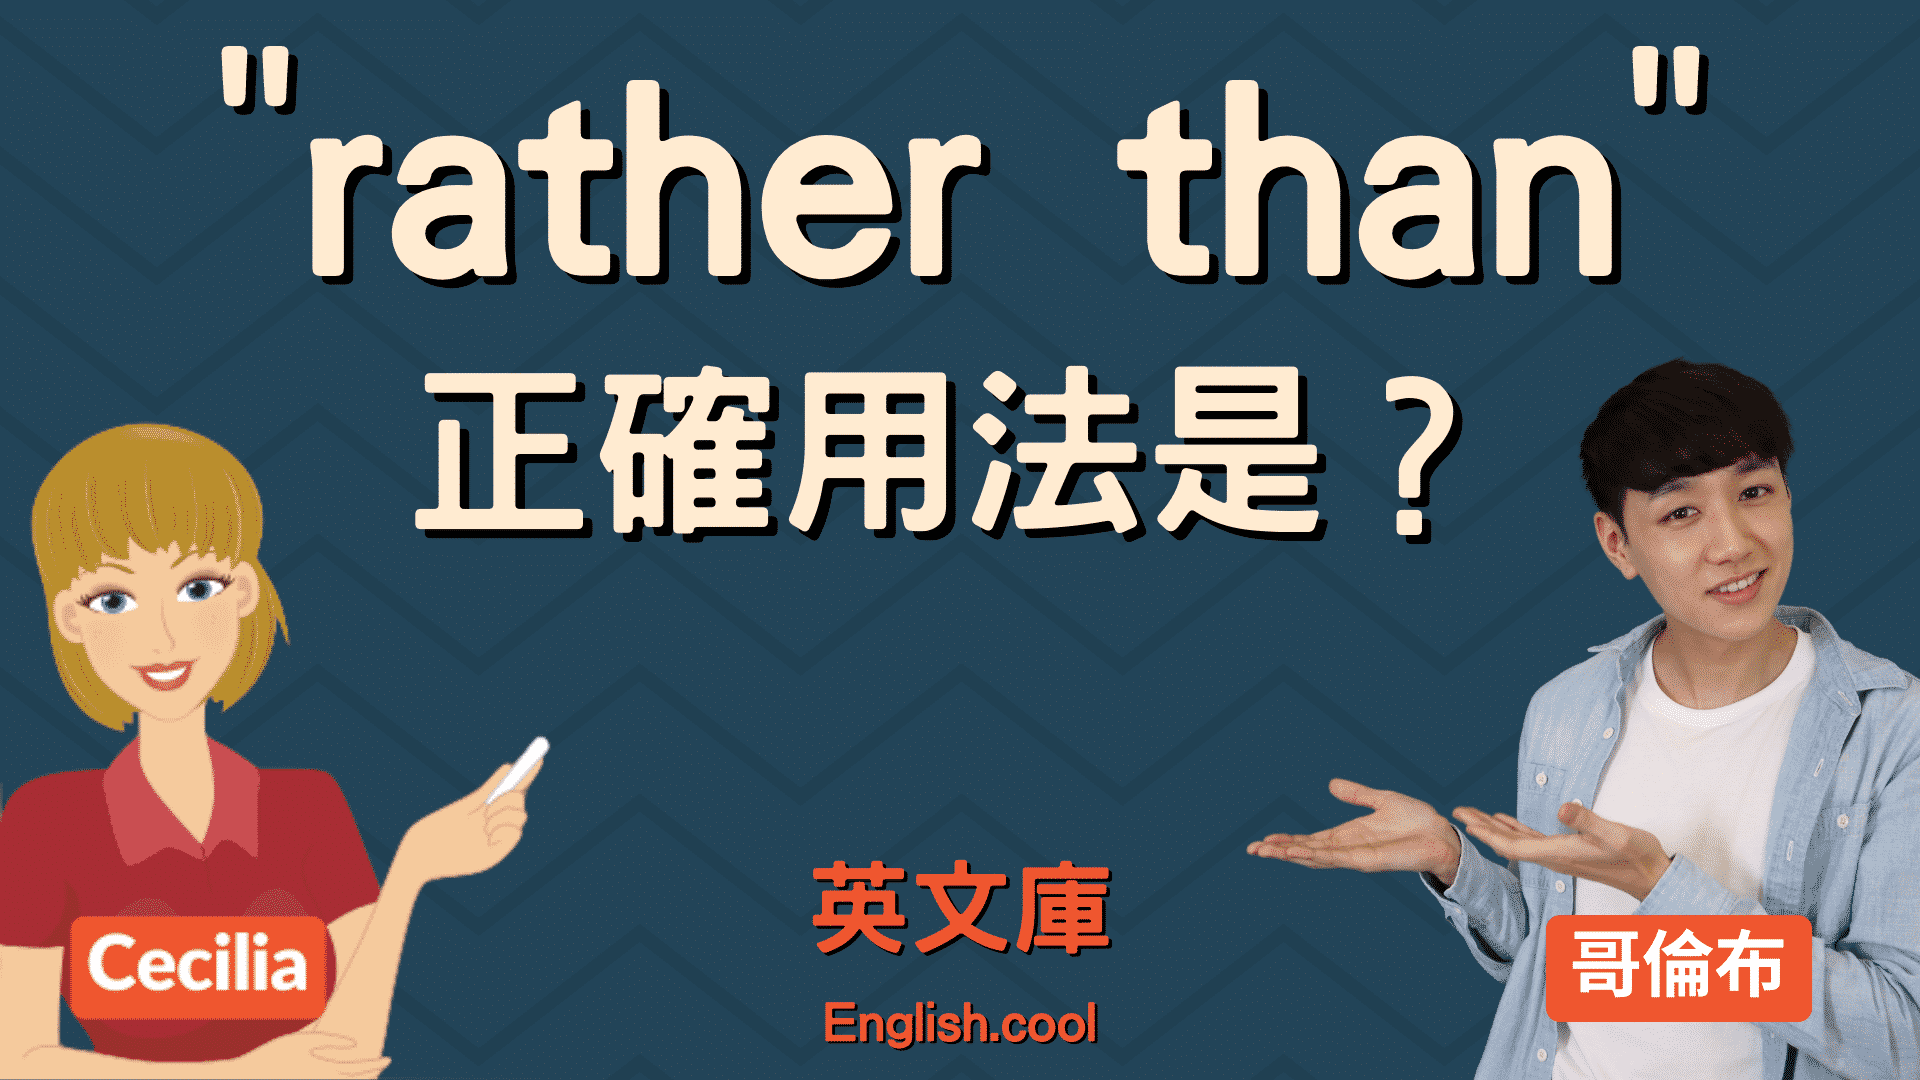 You are currently viewing 「rather than」正確用法是？跟 instead of 差在哪？